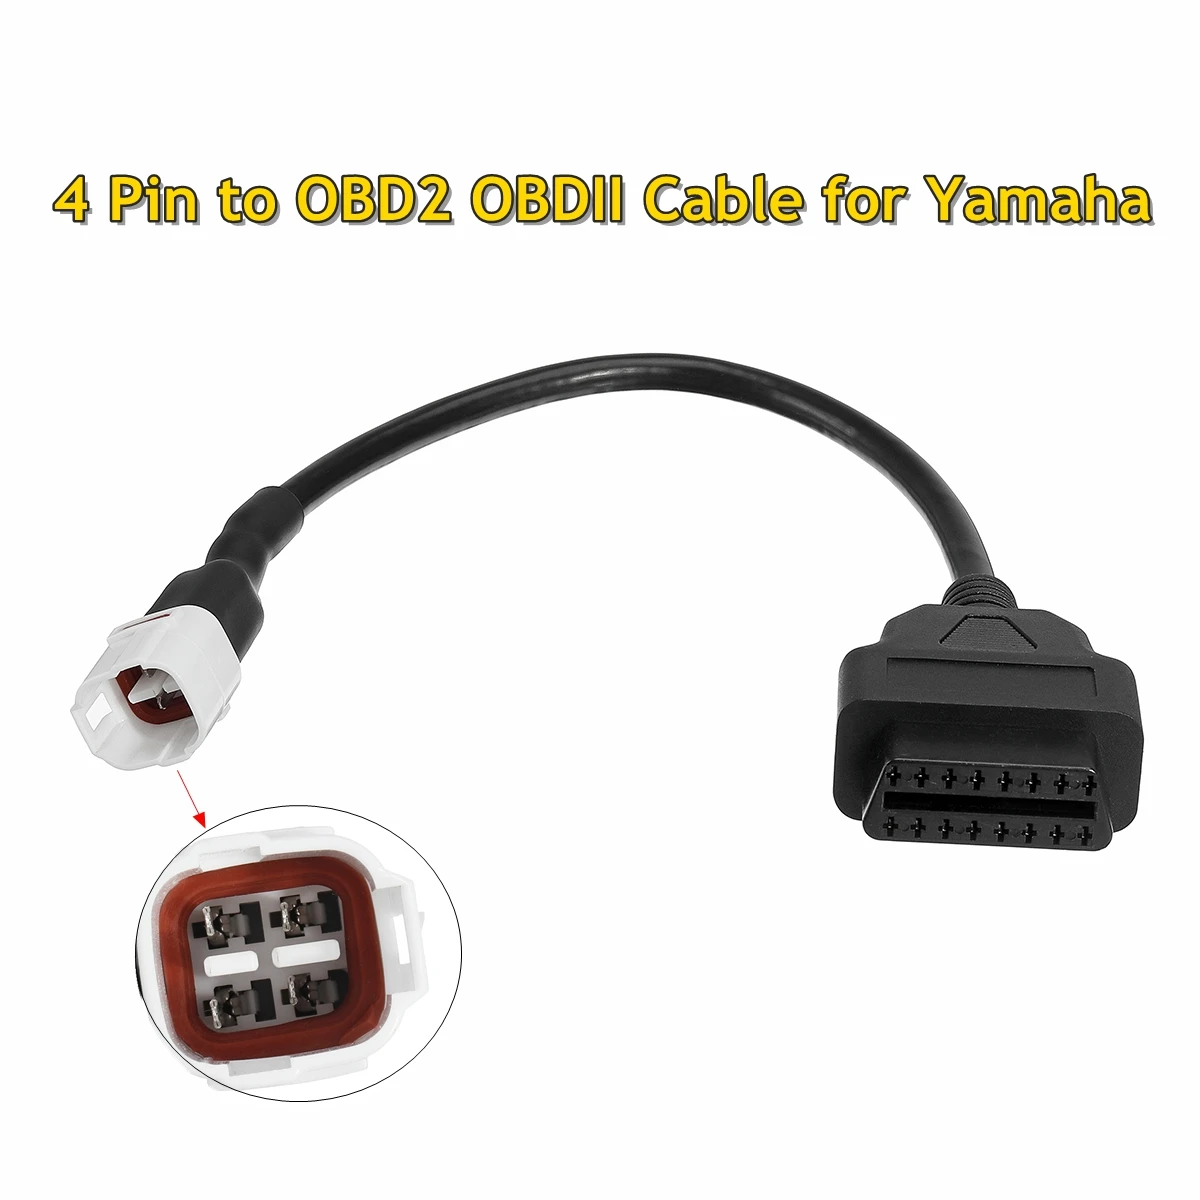 

1PCS Diagnostic 4 Pin to OBD2 OBDII Cable Harness Adapter for Yamaha FJ09, FZ09, MT09, FZ-10, MT-10, XSR900, R6, R1, 900/GT ETC